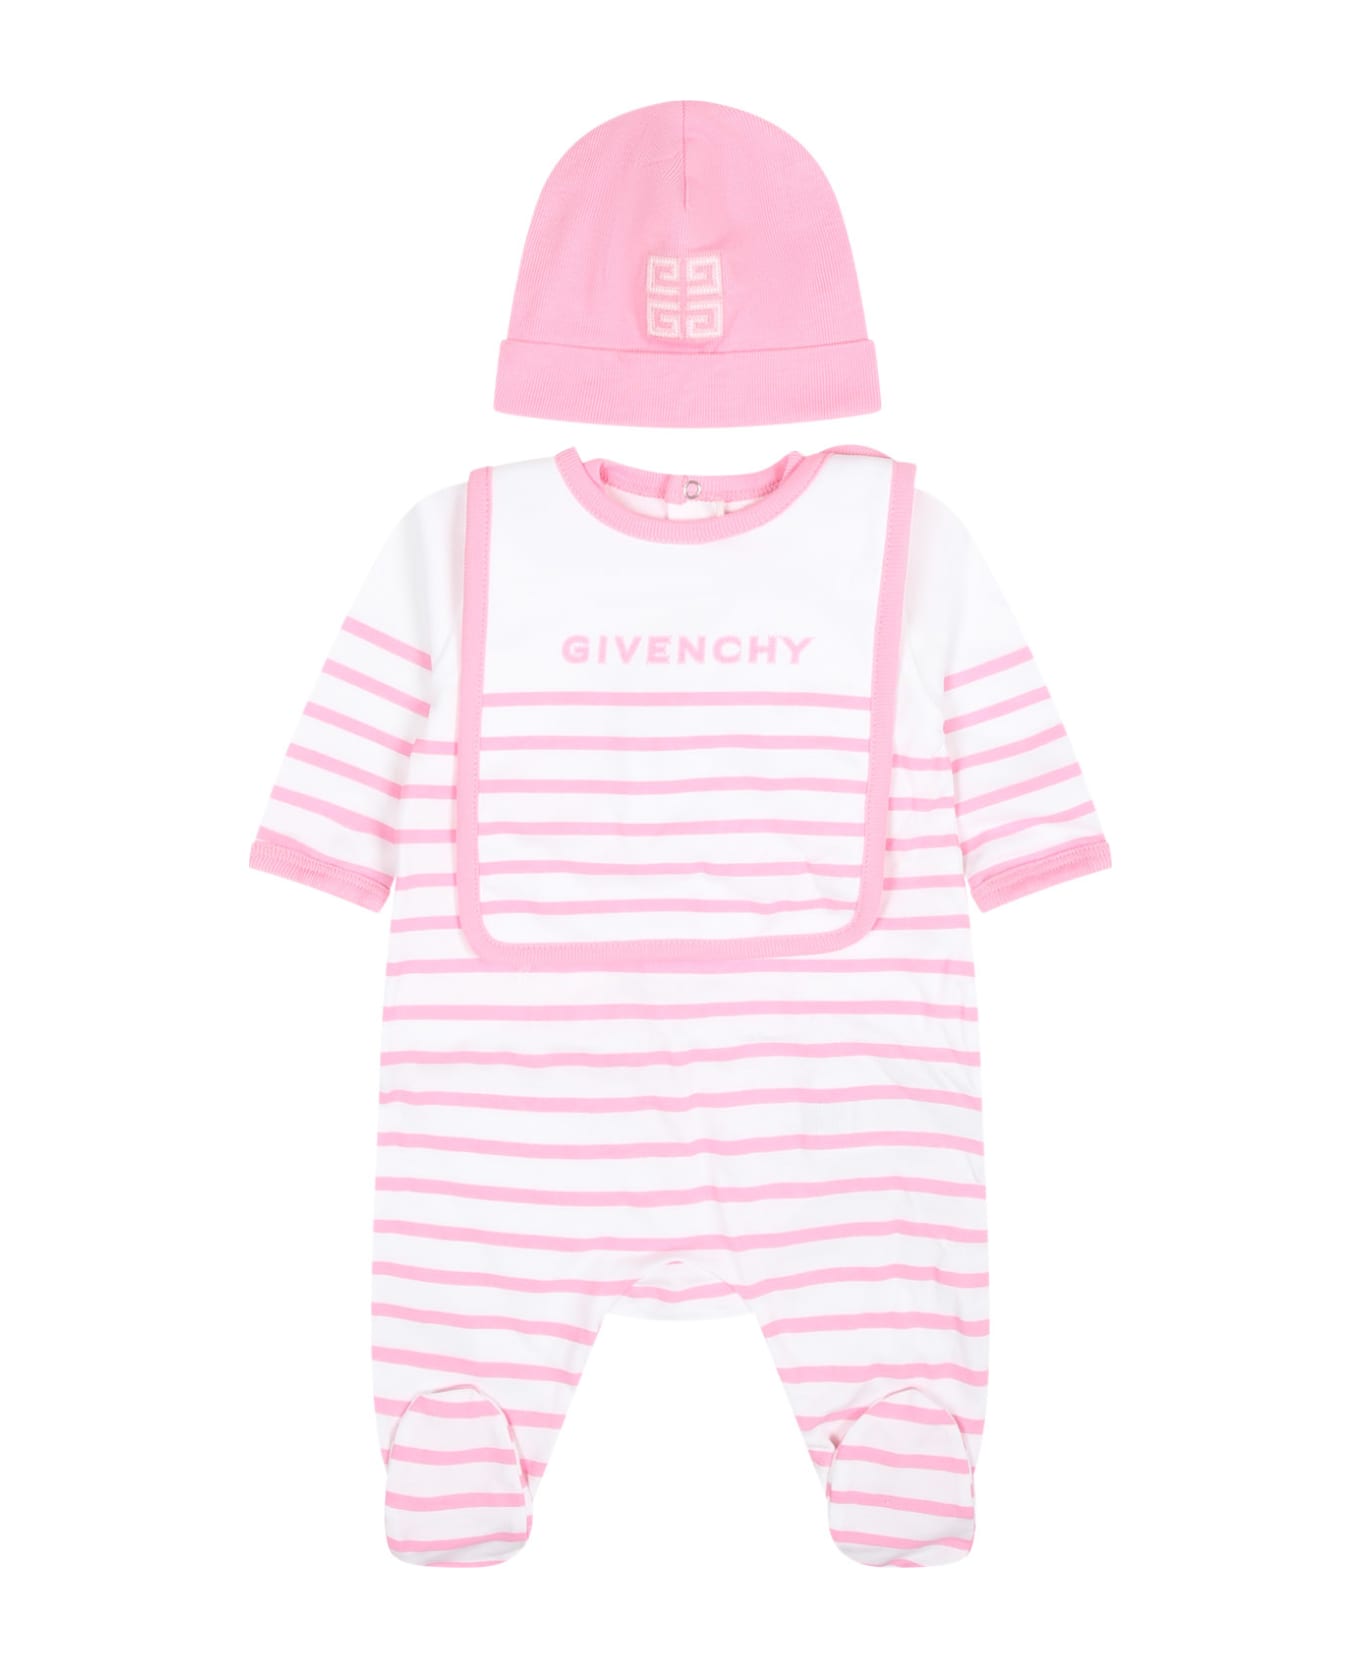 Givenchy Pink Set For Baby Girl With Logo Stripes - Rosa